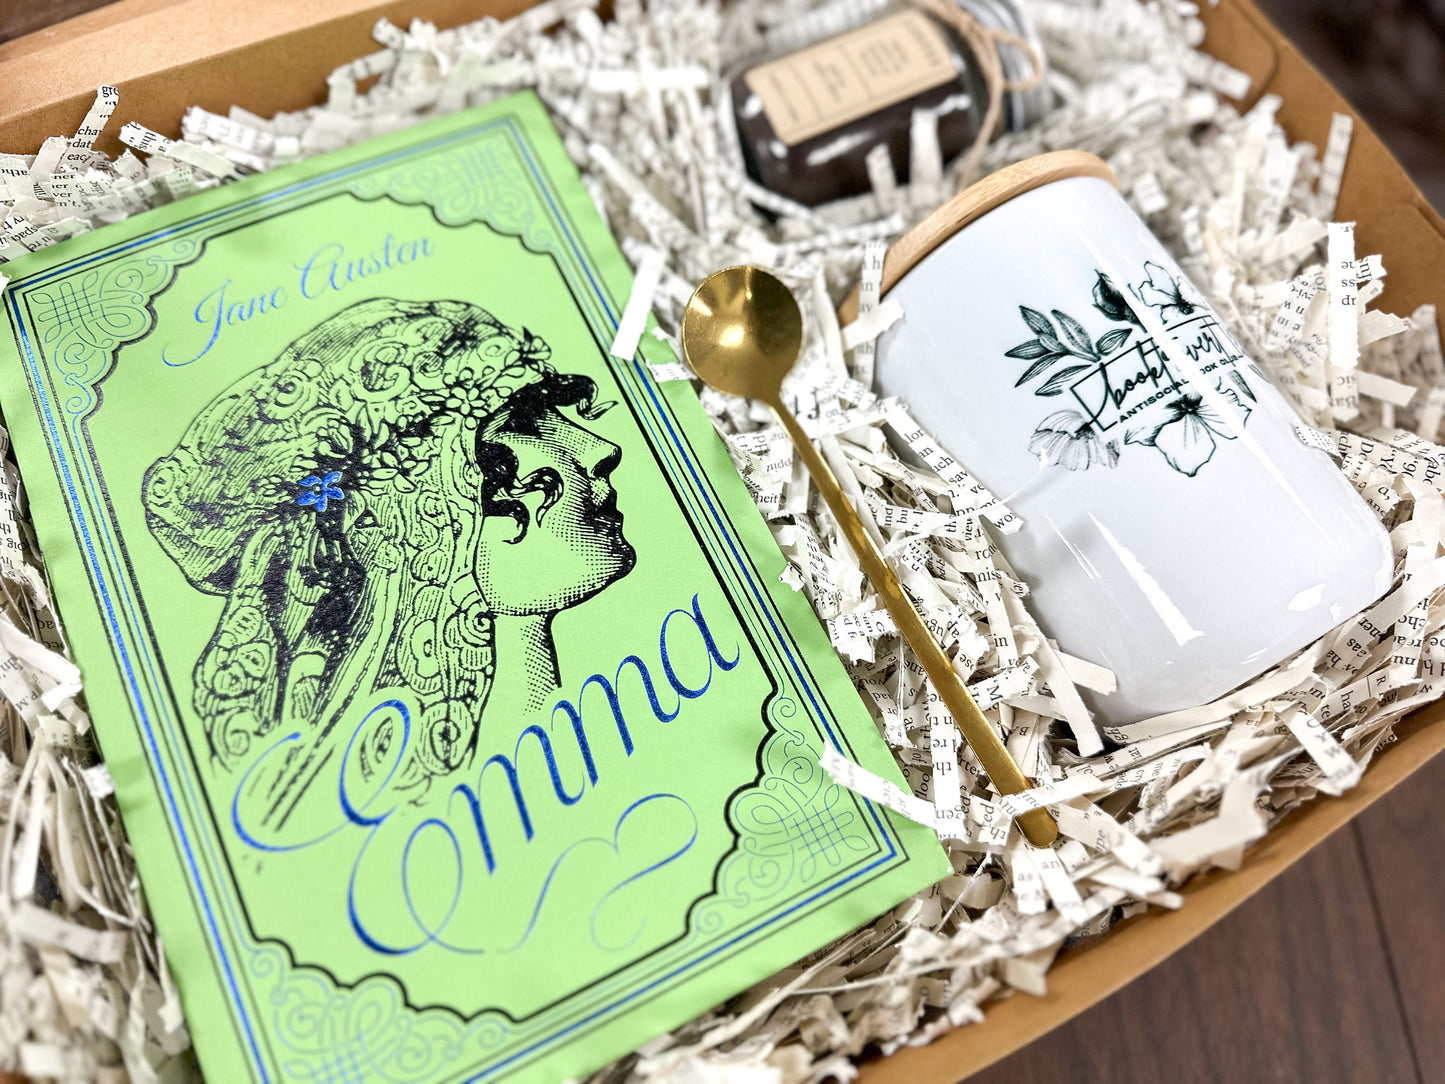 Classic Book Gift Box, Book Gift Idea, Book Lover, Christmas Gift, Emma by Jane Austen